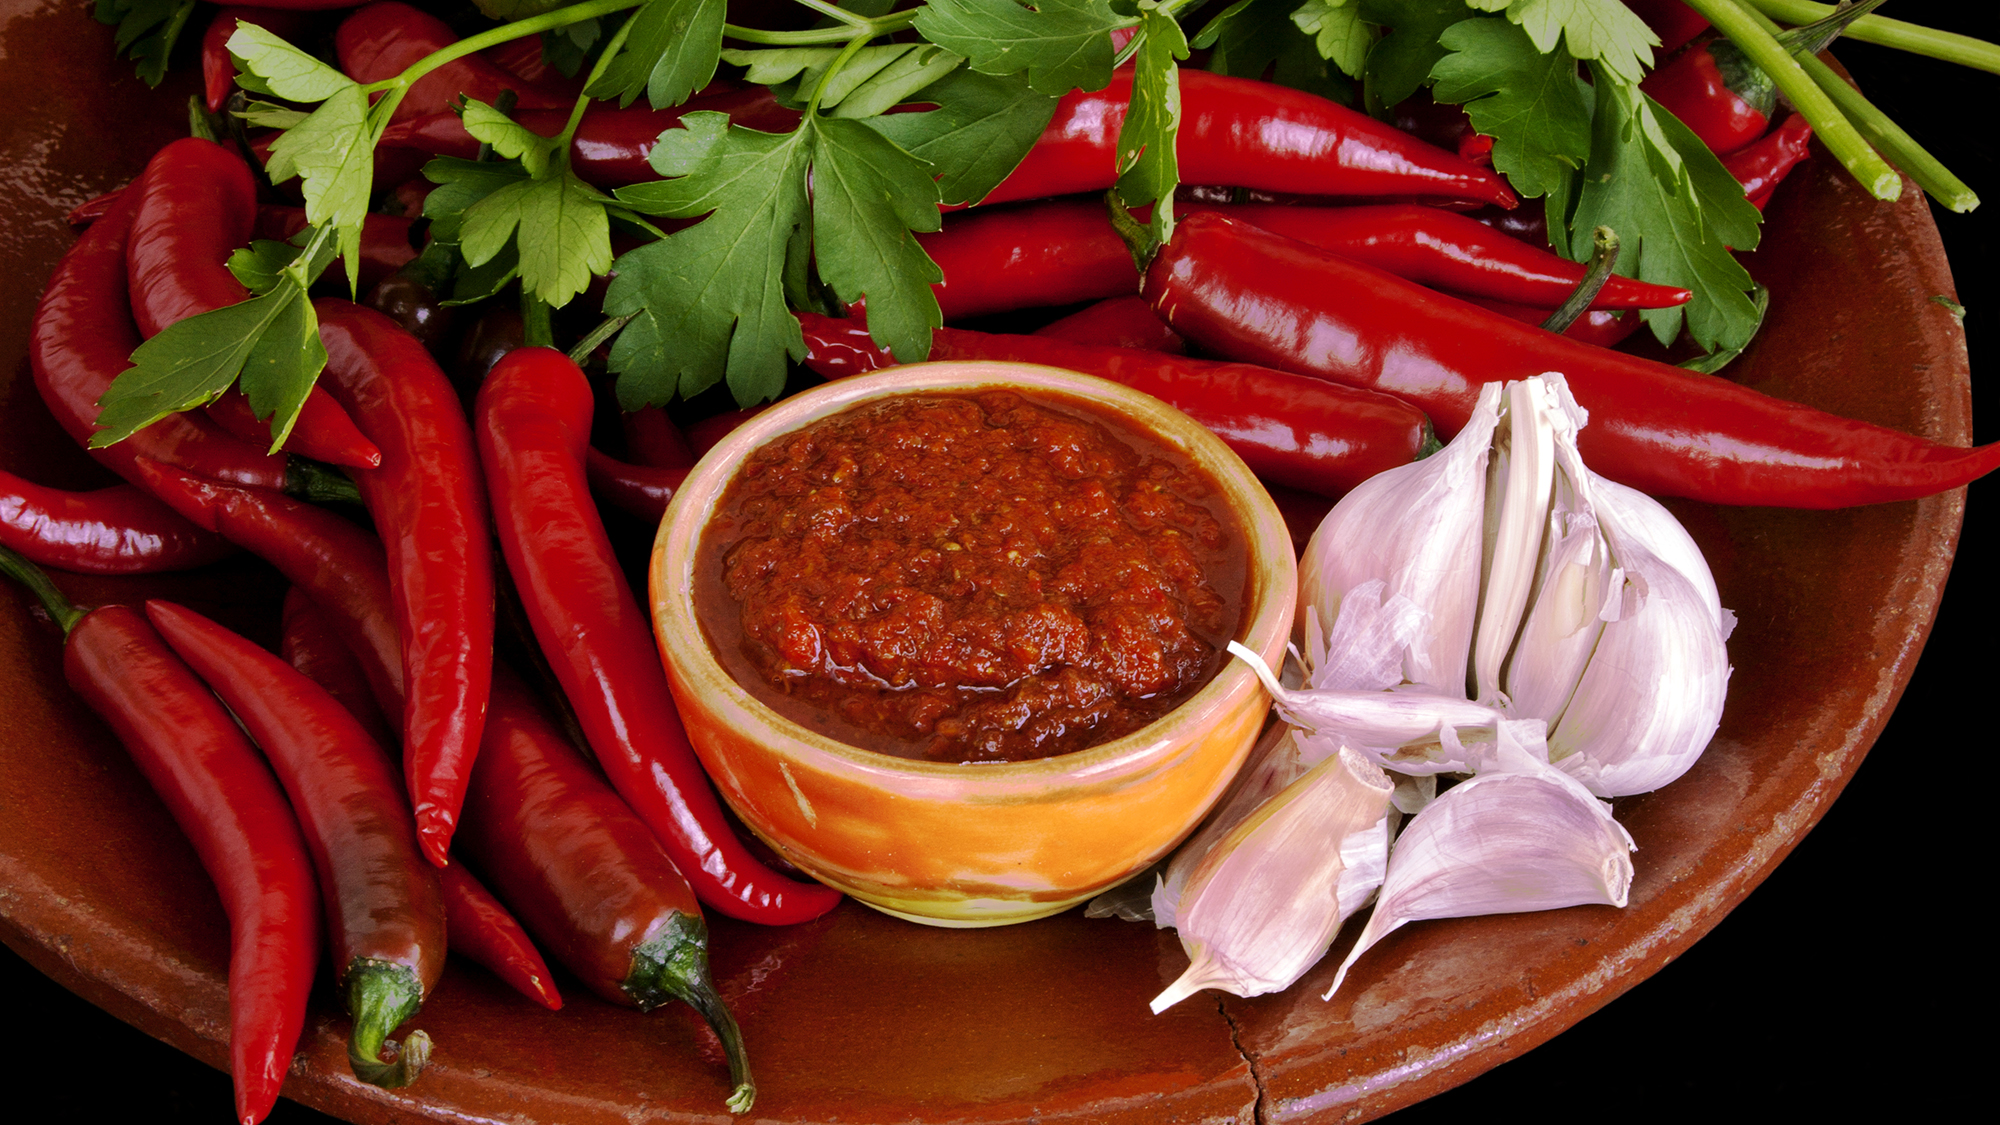 Consumption of spicy food is part of a long-term lifestyle influenced by geography and culture.